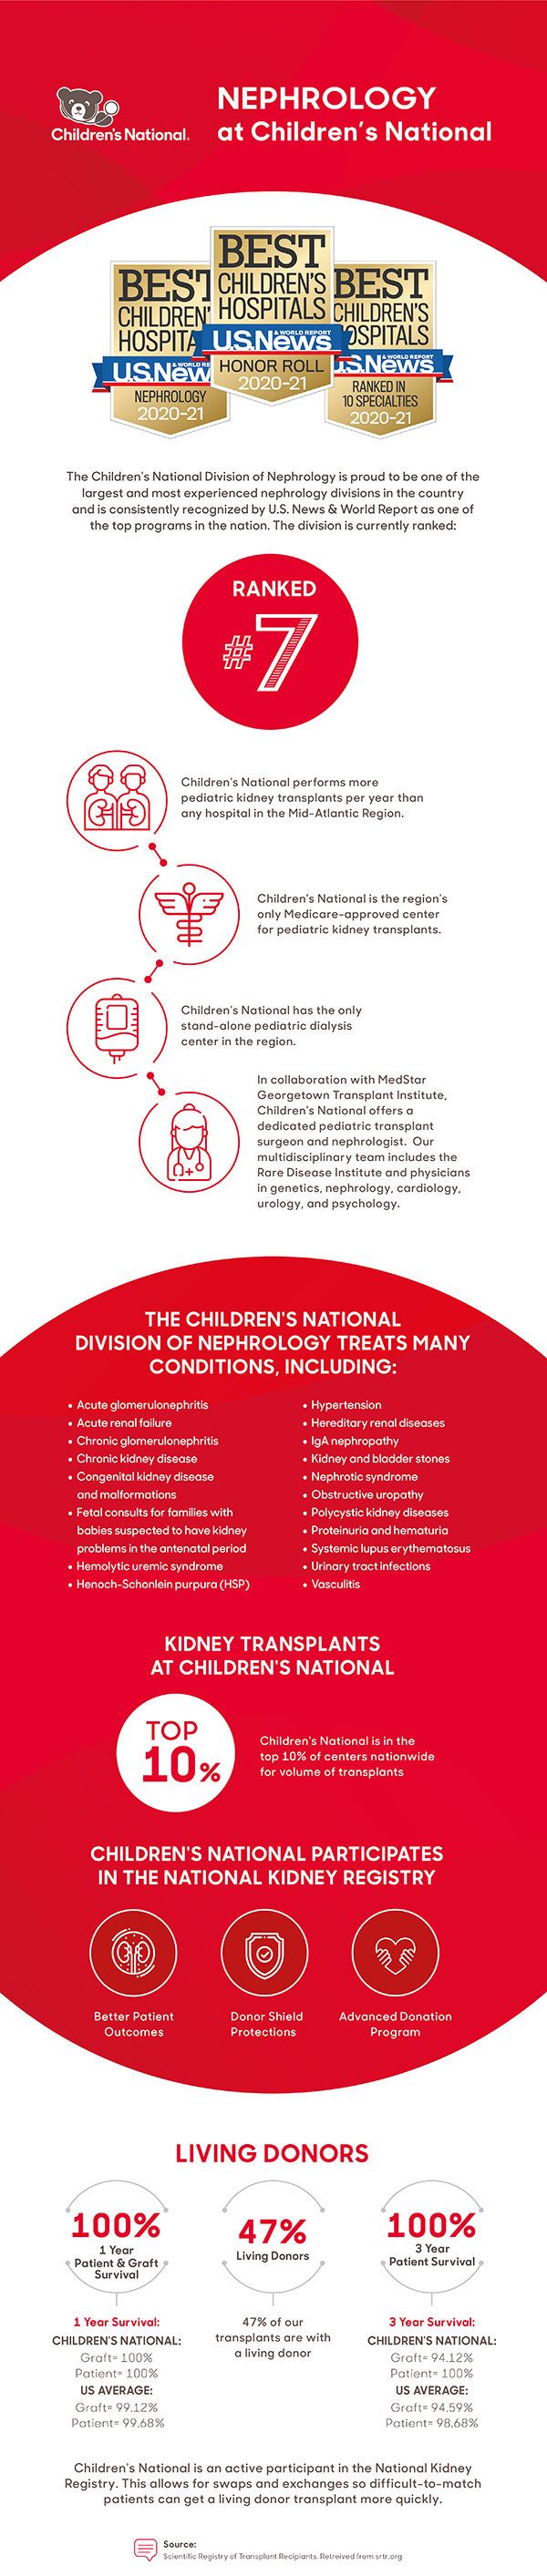 The Children’s National Division of Nephrology is consistently recognized by U.S. News & World Report as one of the top programs in the nation.